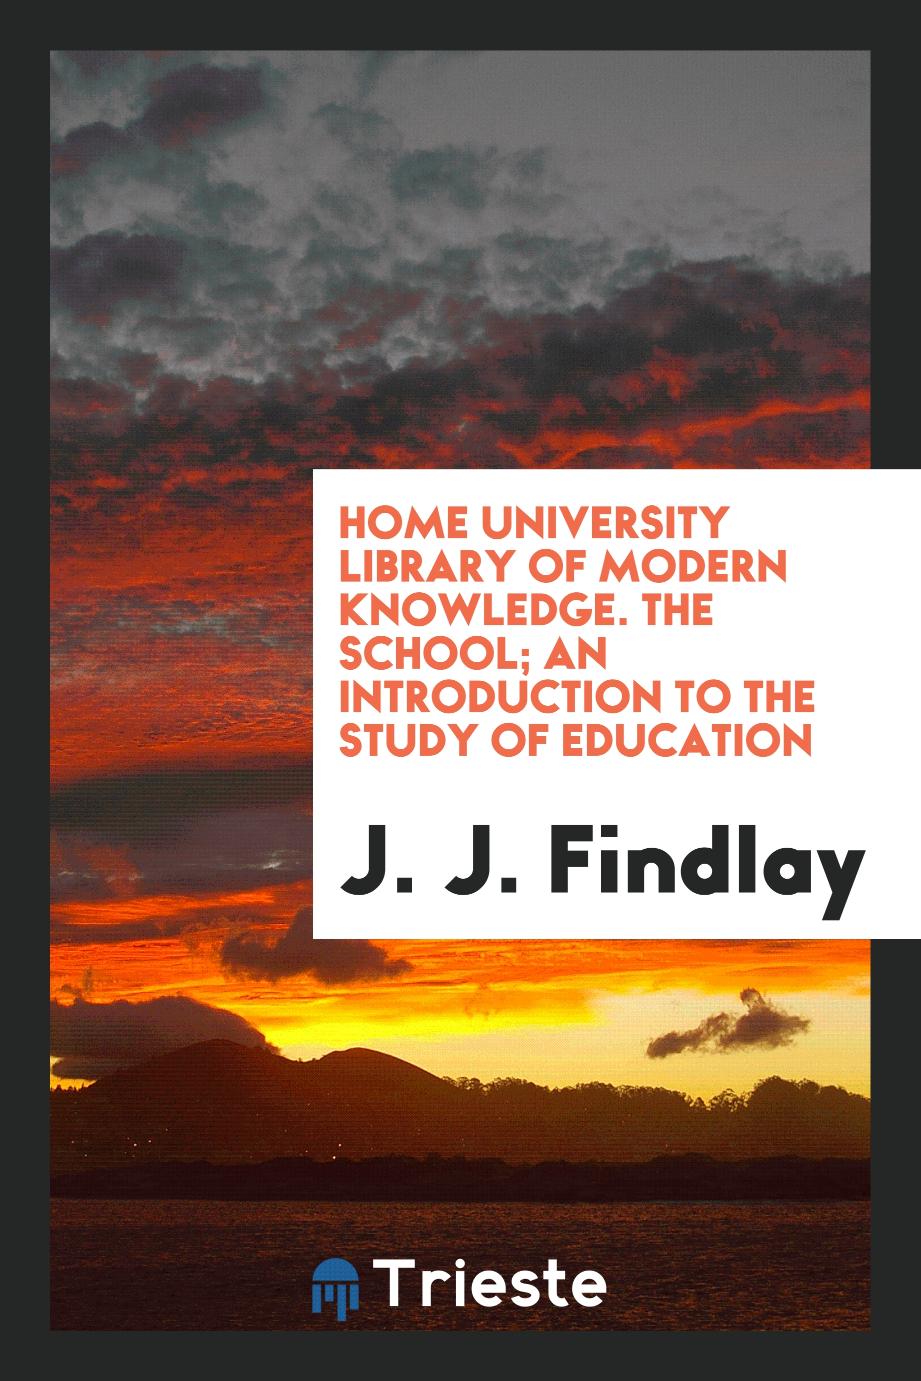 Home university library of modern knowledge. The school; an introduction to the study of education